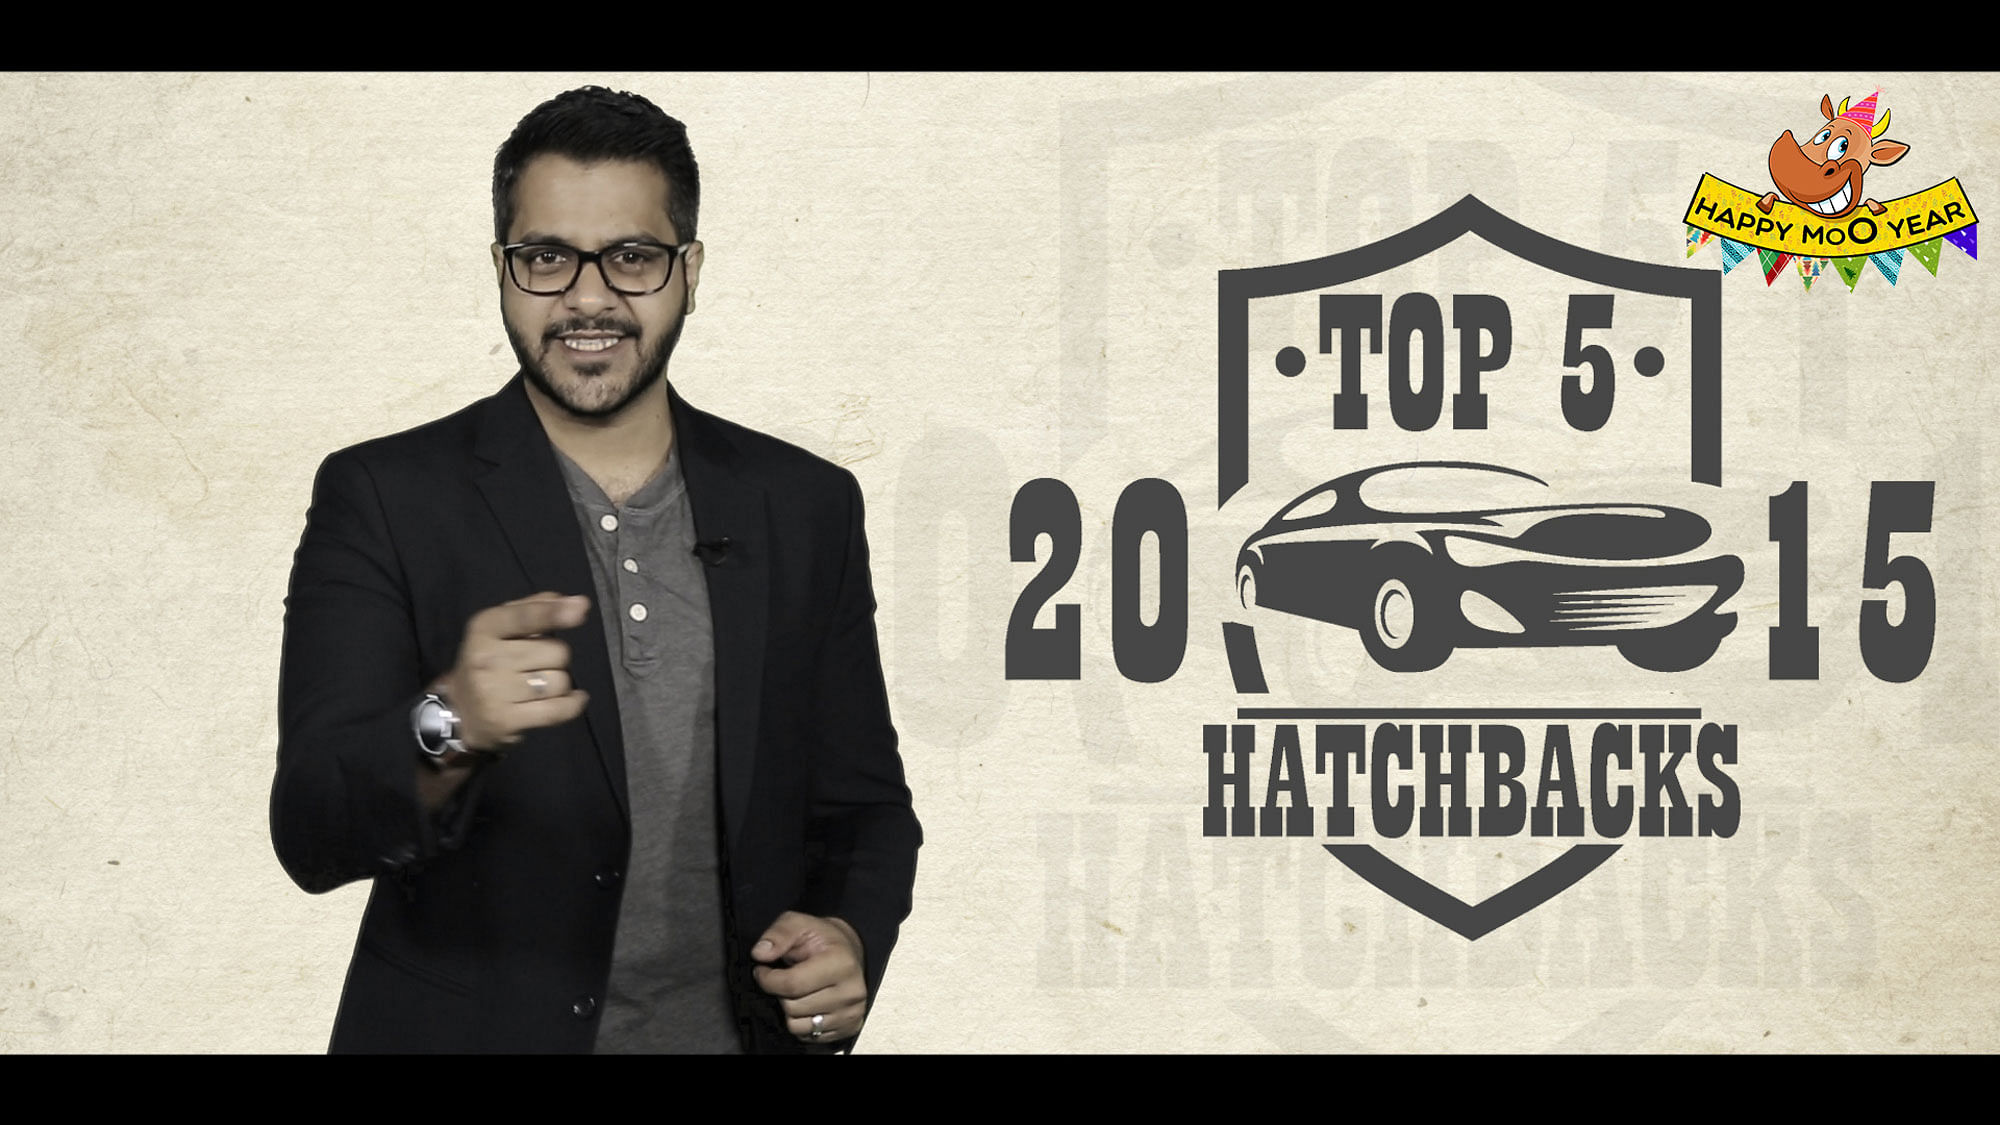 The Quint gets you the top 5 Hatchbacks of the year 2015. (Photo: <b>The Quint</b>)